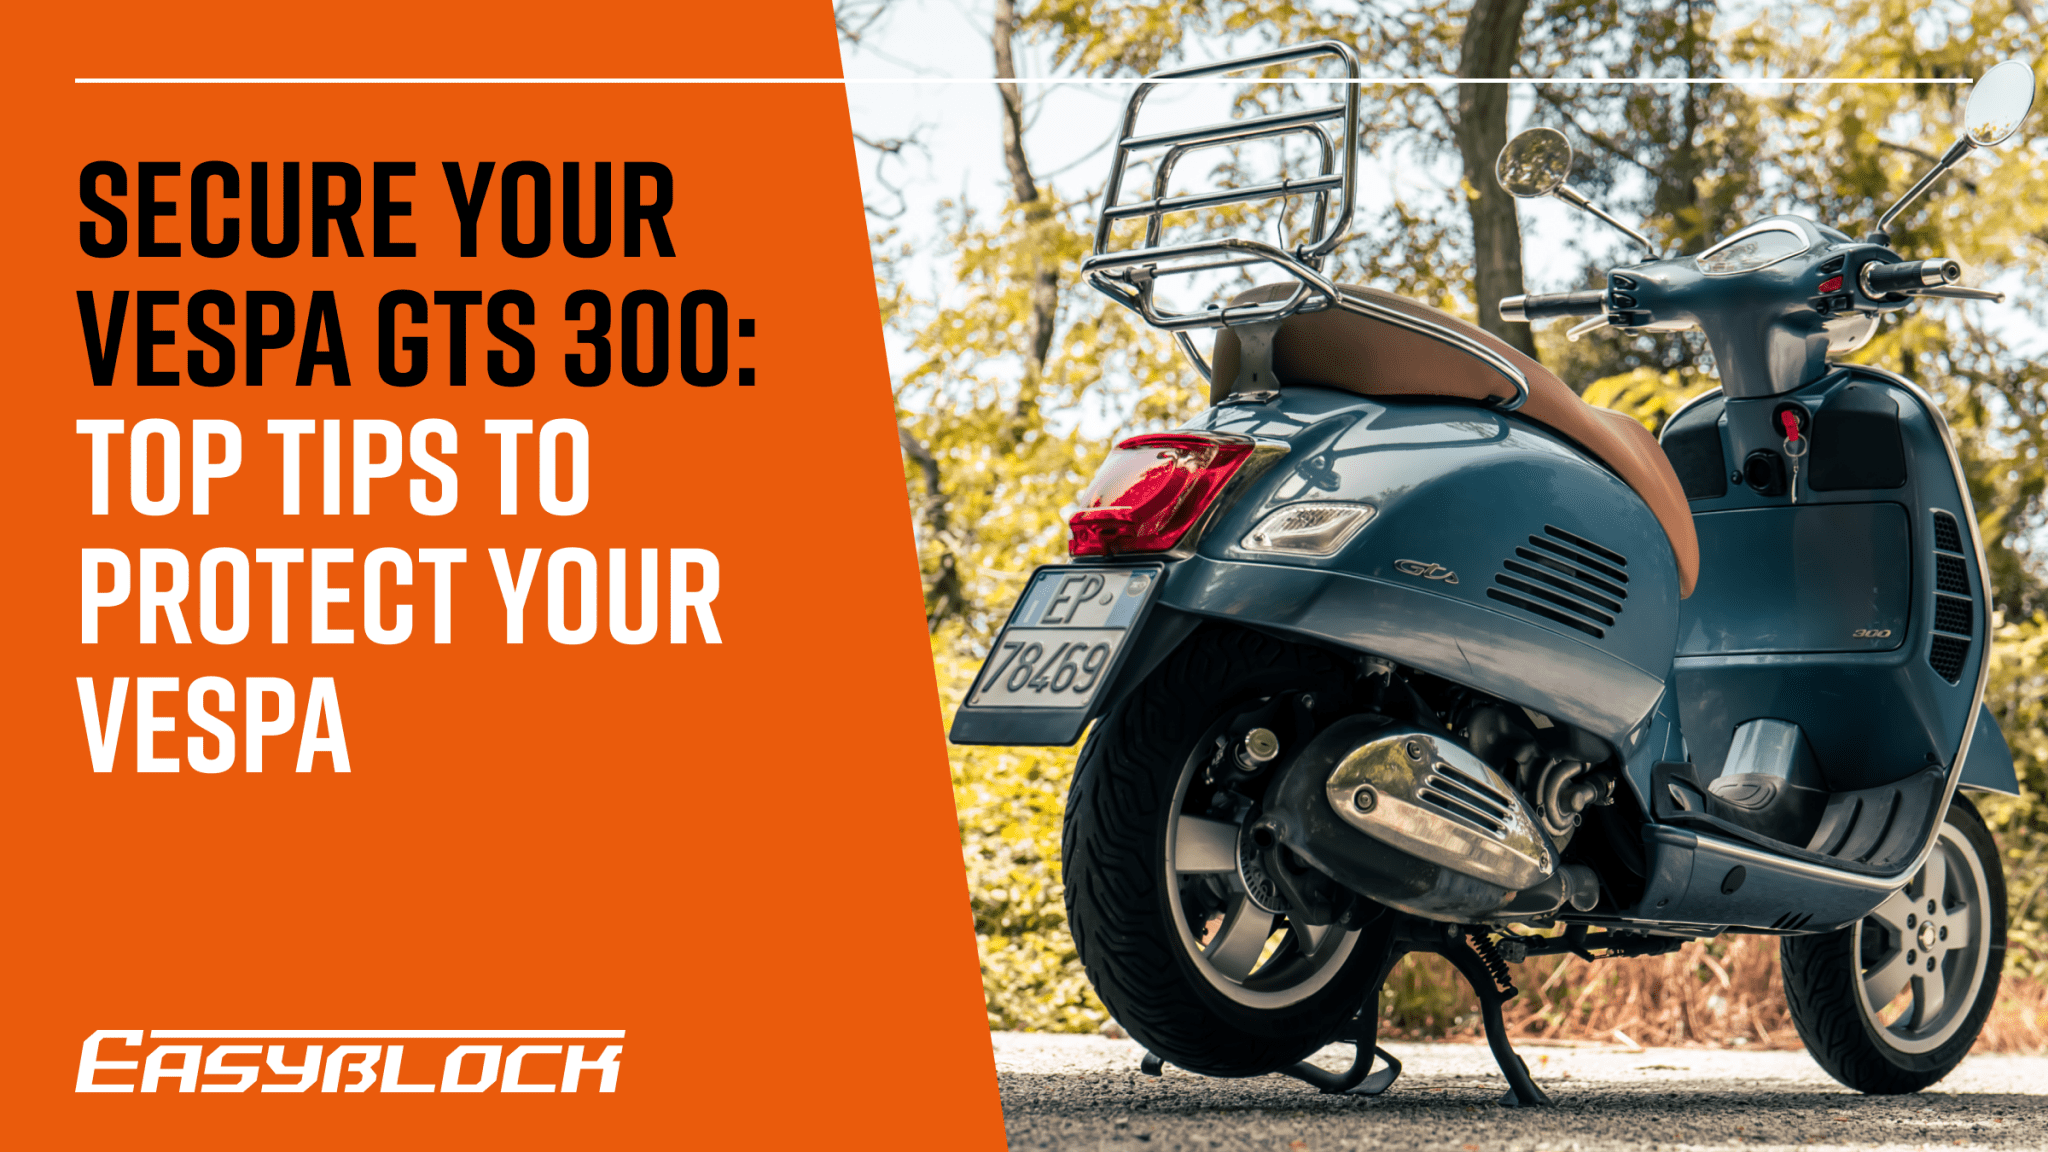 Secure Your Vespa GTS 300: Top Tips to Protect Your Vespa From Theft